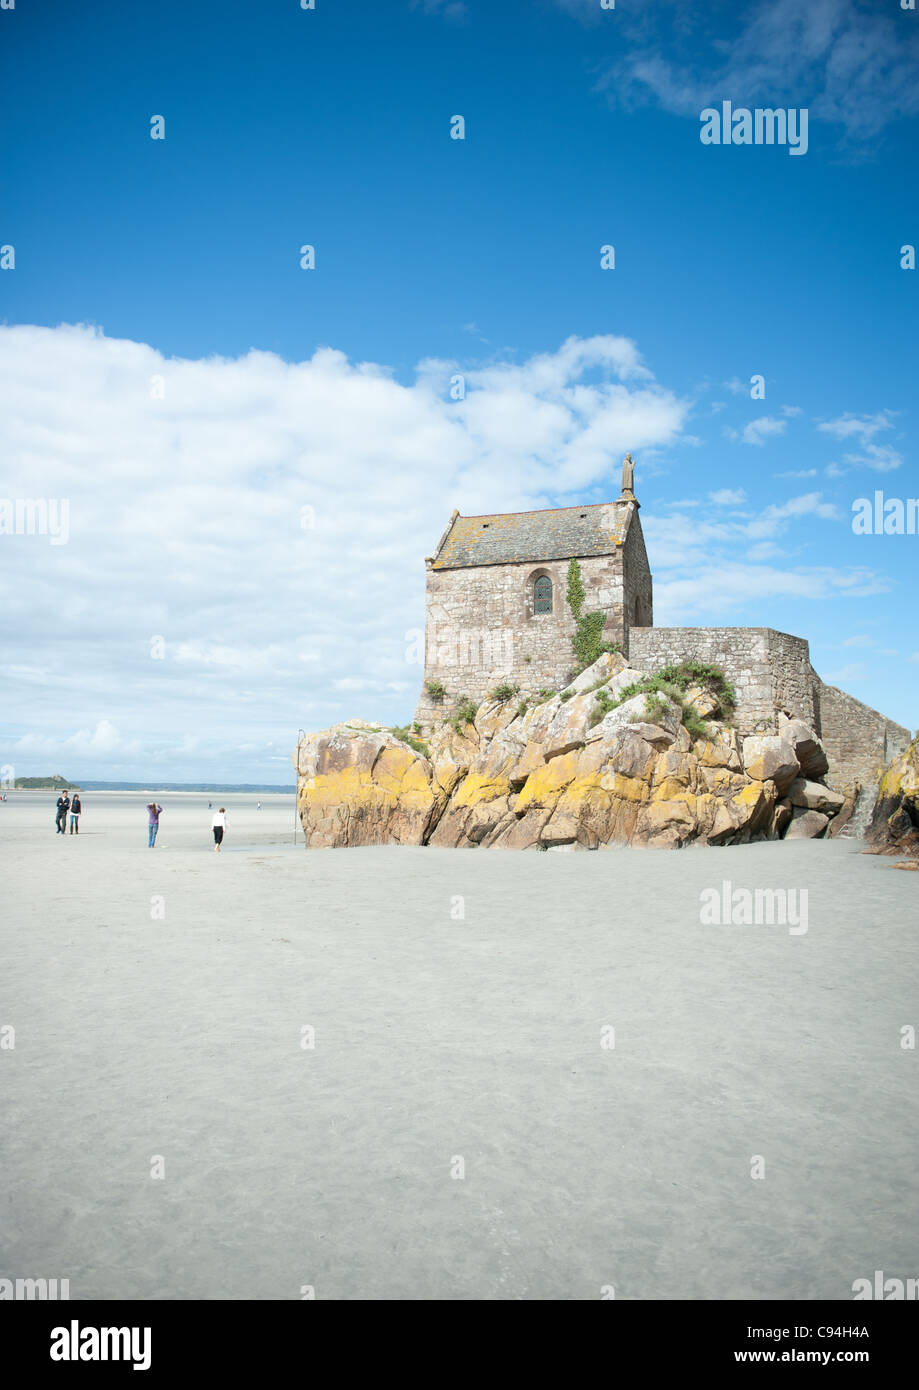 Chapel St-Aubert, part of the UNESCO world heritage Mont St-Michel in Normandy France, at low tide Stock Photo